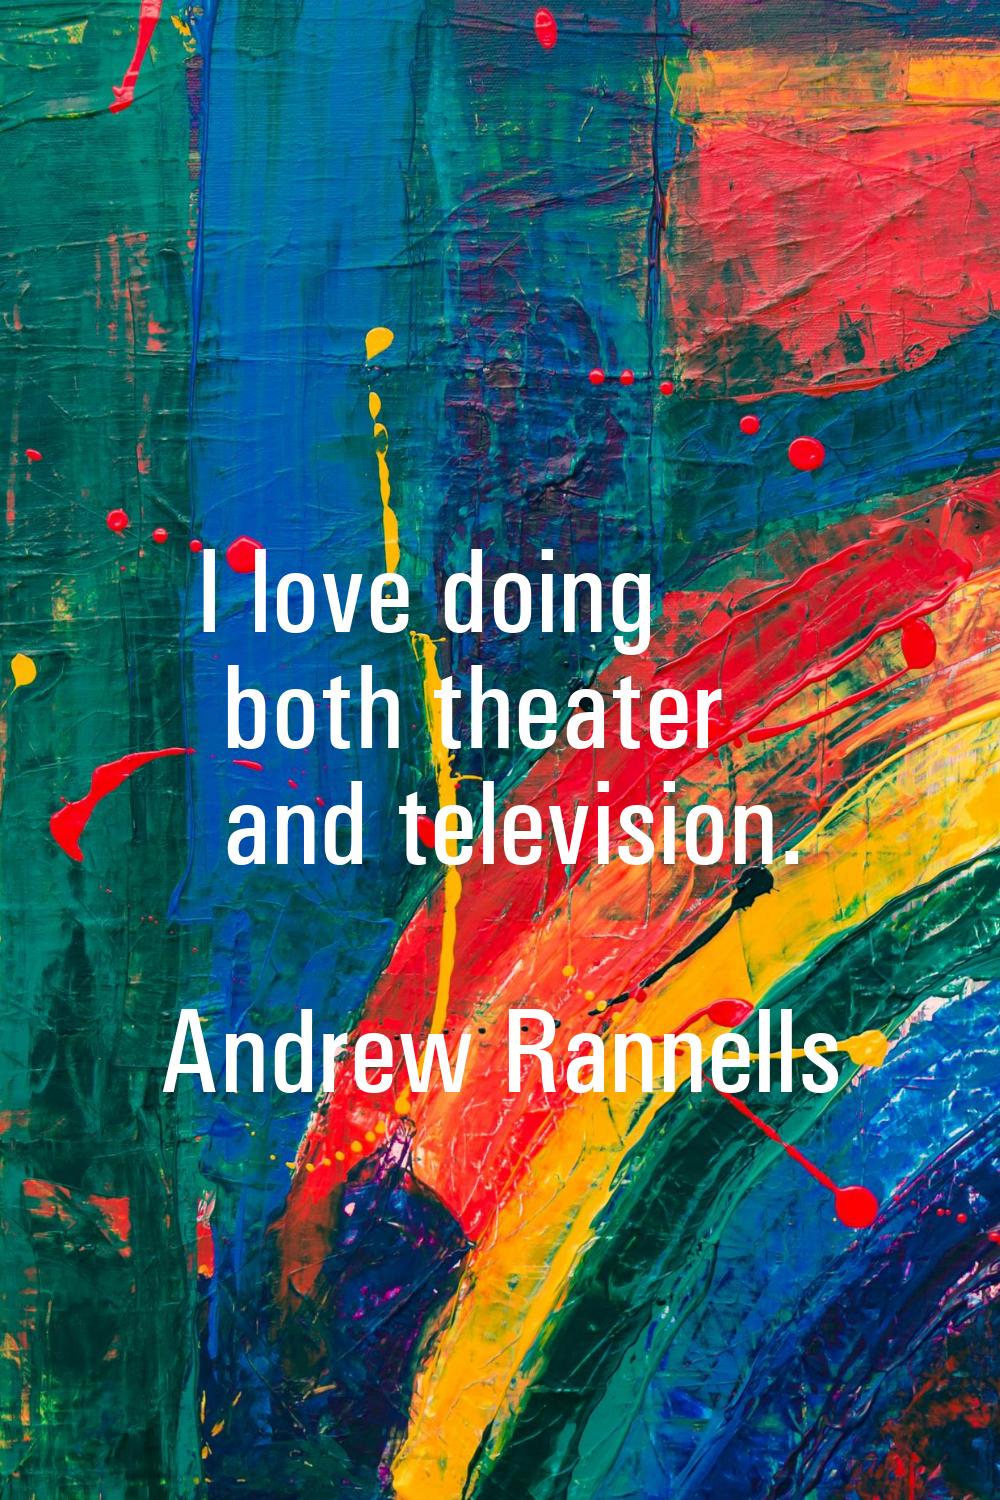 I love doing both theater and television.